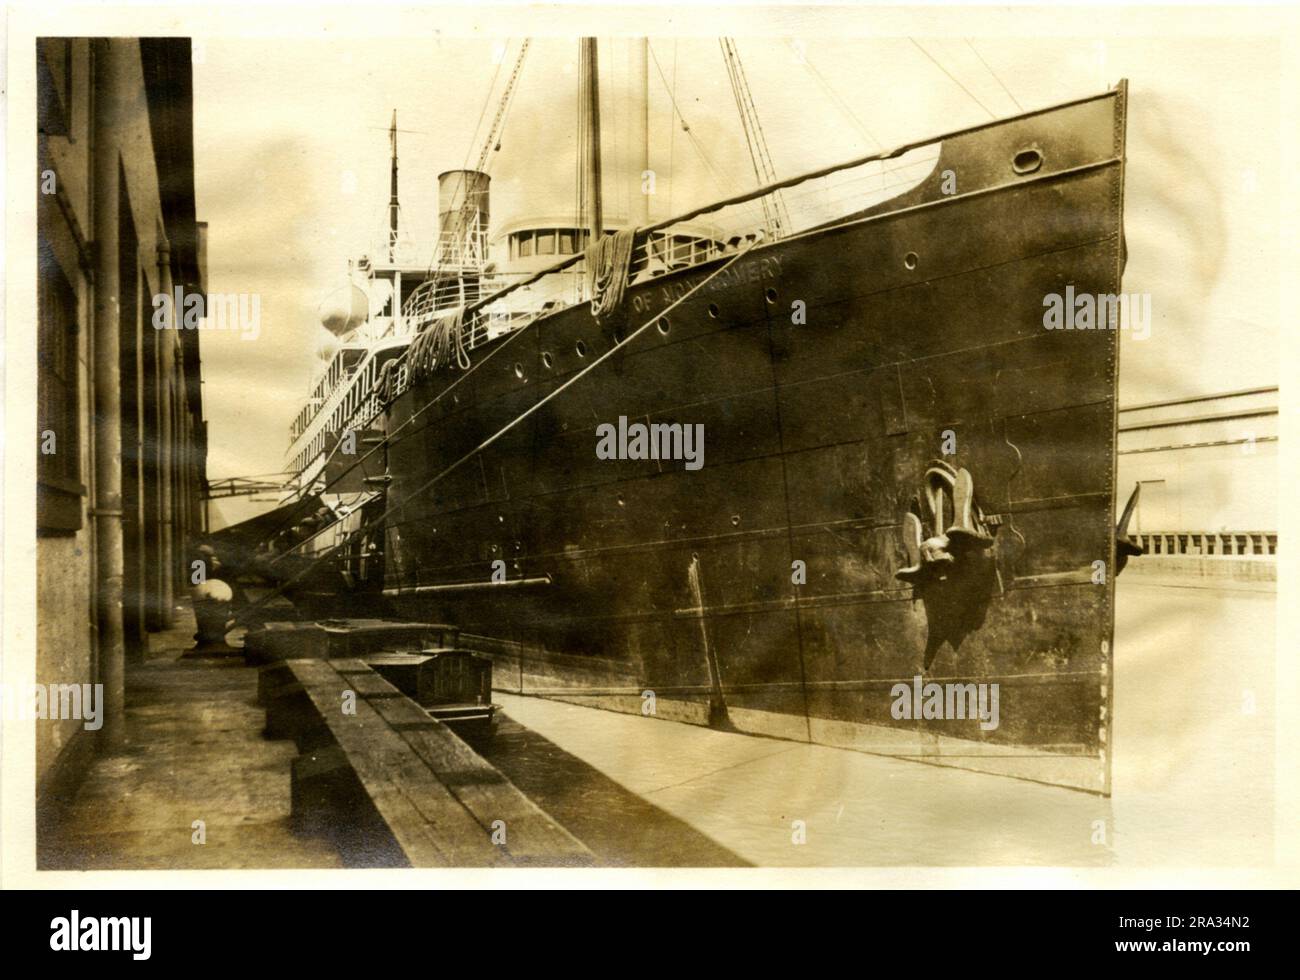 Photograph of the Starboard View of the SS City of Montgomery. Starboard View. Date: - July 27 1918. Photograph : - S. S. City Of Montgomery. Nationality: - American. Tonnage: - 5425. Captain: - M. A. Hammond. Owners: - Ocean S.S. Co. Where From: - New York, N. Y. Destination: - New York, N. Y. Where Photographed: - Savannah, GA. Sixth Naval District. By Whom Photographed: - J. B. Dearborn. Date Photographed July 13th., 1918.. 1918-07-13T00:00:00. Stock Photo